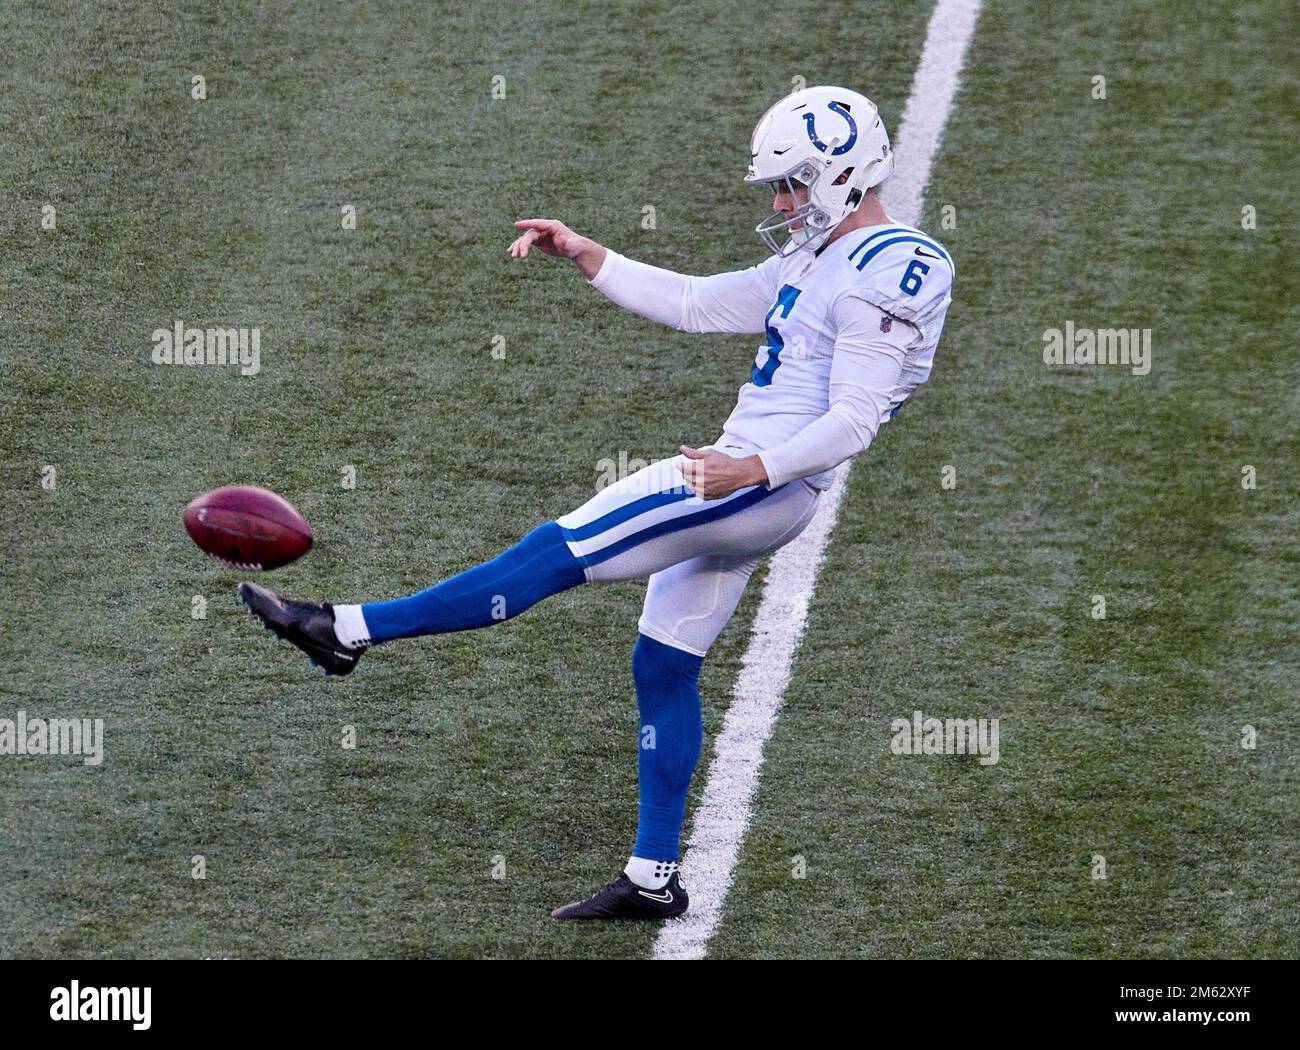 East Rutherford, New Jersey, USA. 1st Jan, 2023. Indianapolis Colts punter Matt Haack (6) during a NFL game against the New York Giants in East Rutherford, New Jersey. Duncan Williams/CSM/Alamy Live News Stock Photo